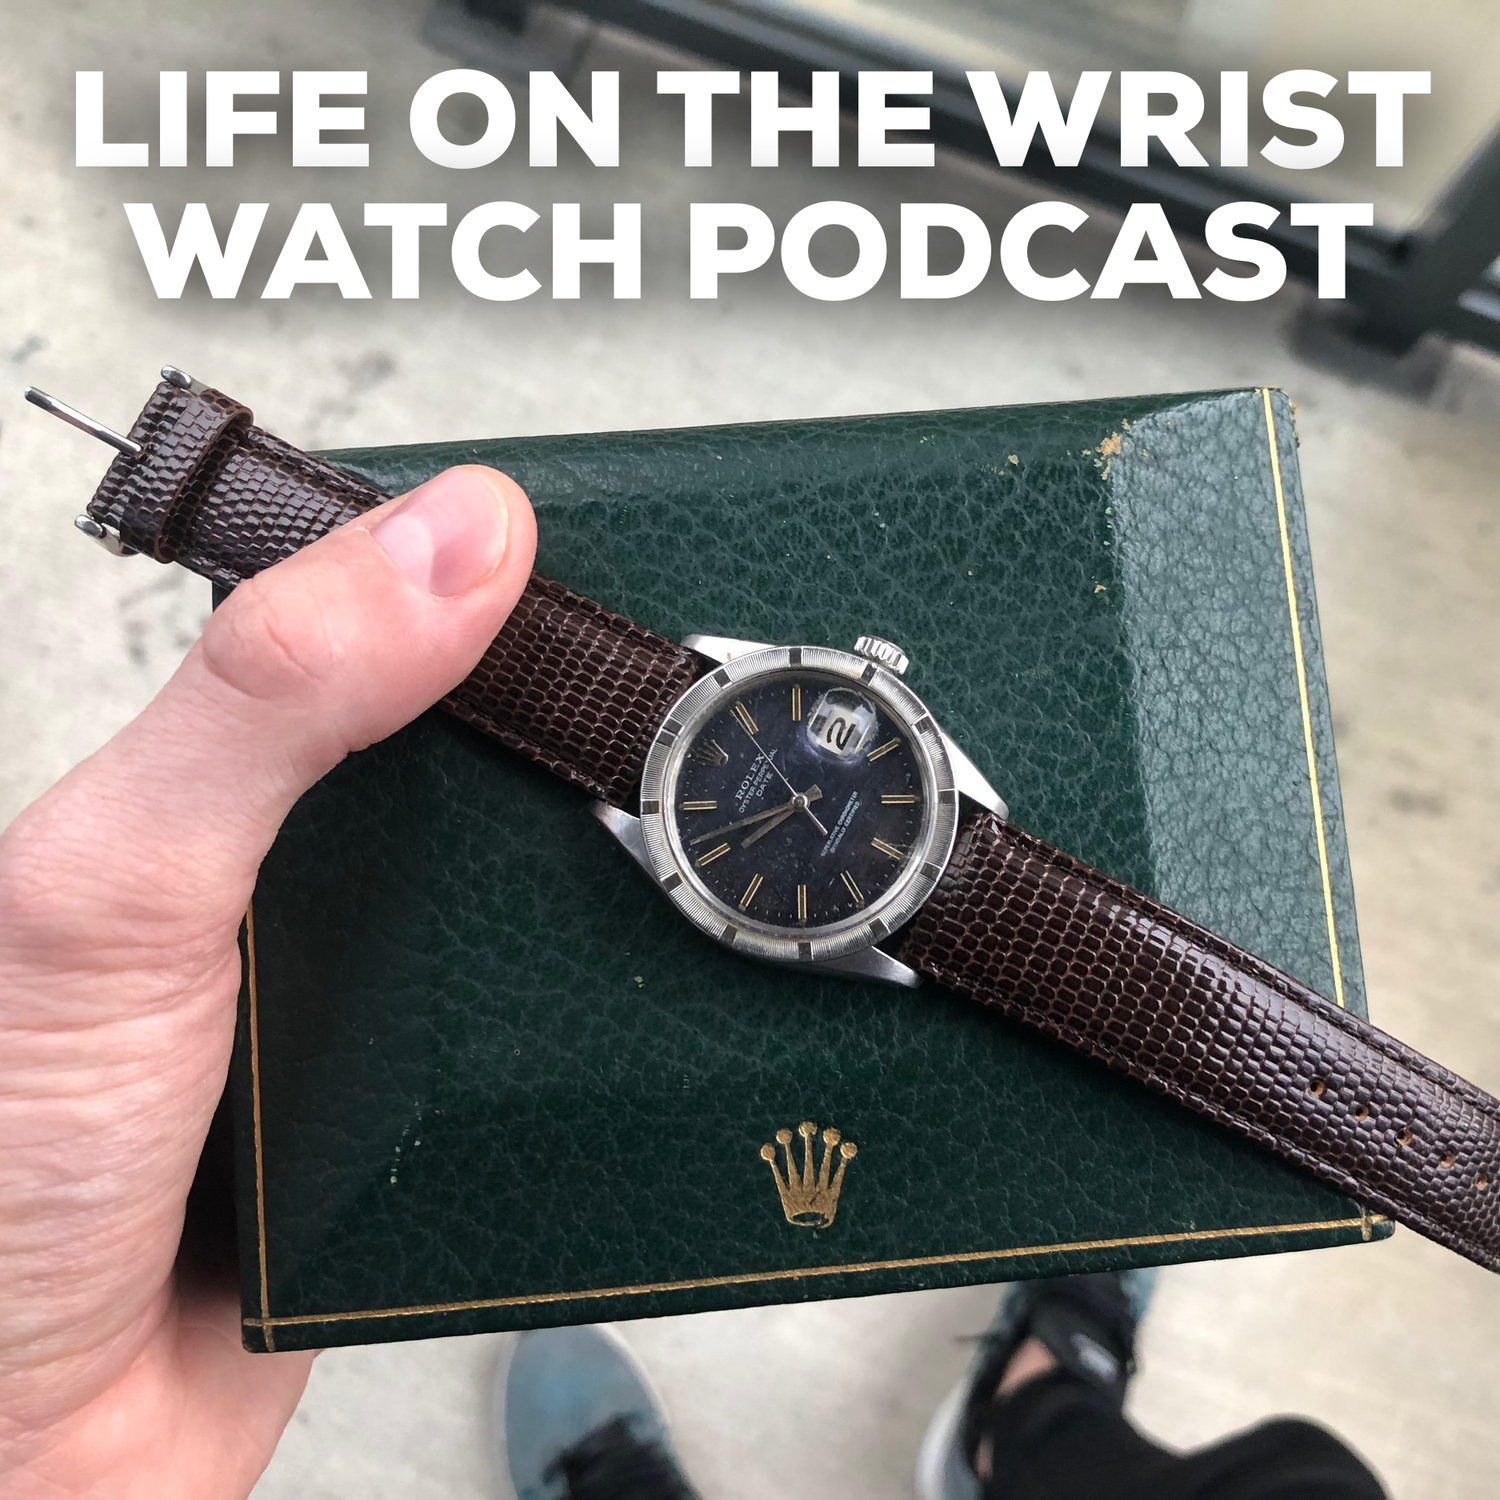 Ep. 162 - Piaget Polo 79, Raúl Pagès wins Louis Vuitton Watch Prize, and More Vintage Watches